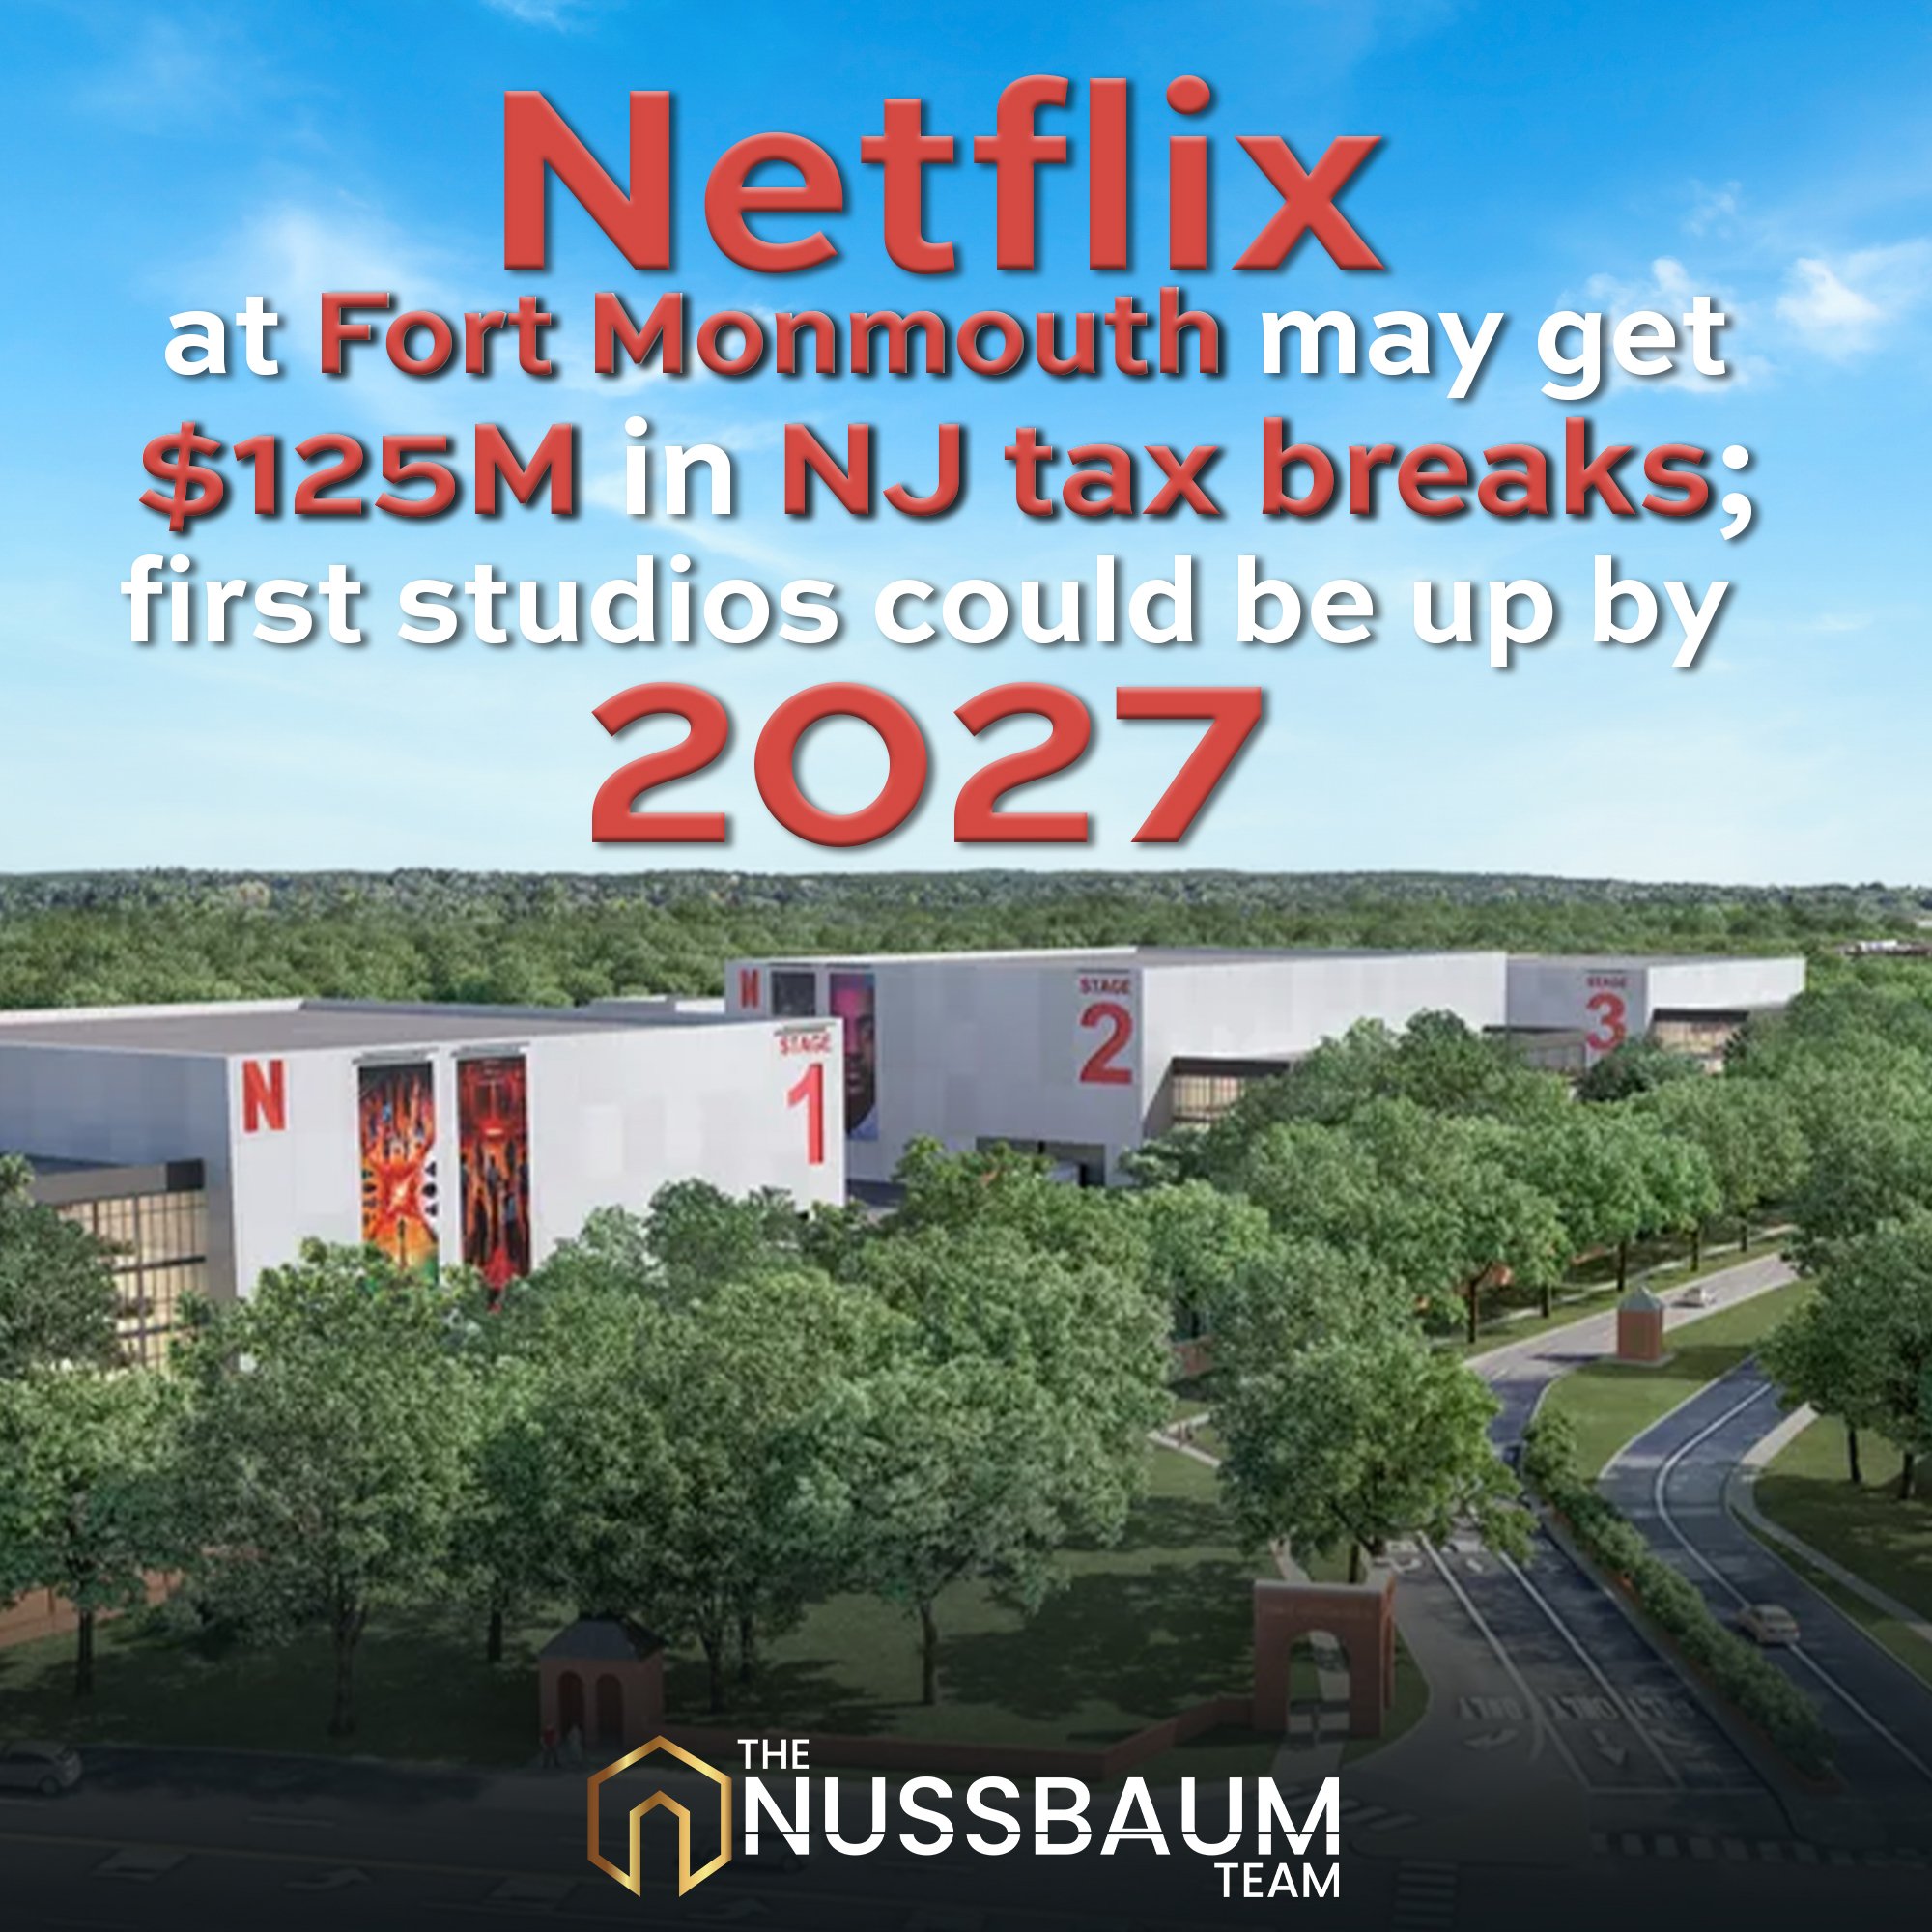 TRENTON - Netflix was designated a studio partner by the New Jersey Economic Development Authority for its television and movie production campus planned for the former grounds of Fort Monmouth, which makes the streaming giant eligible for lucrative 